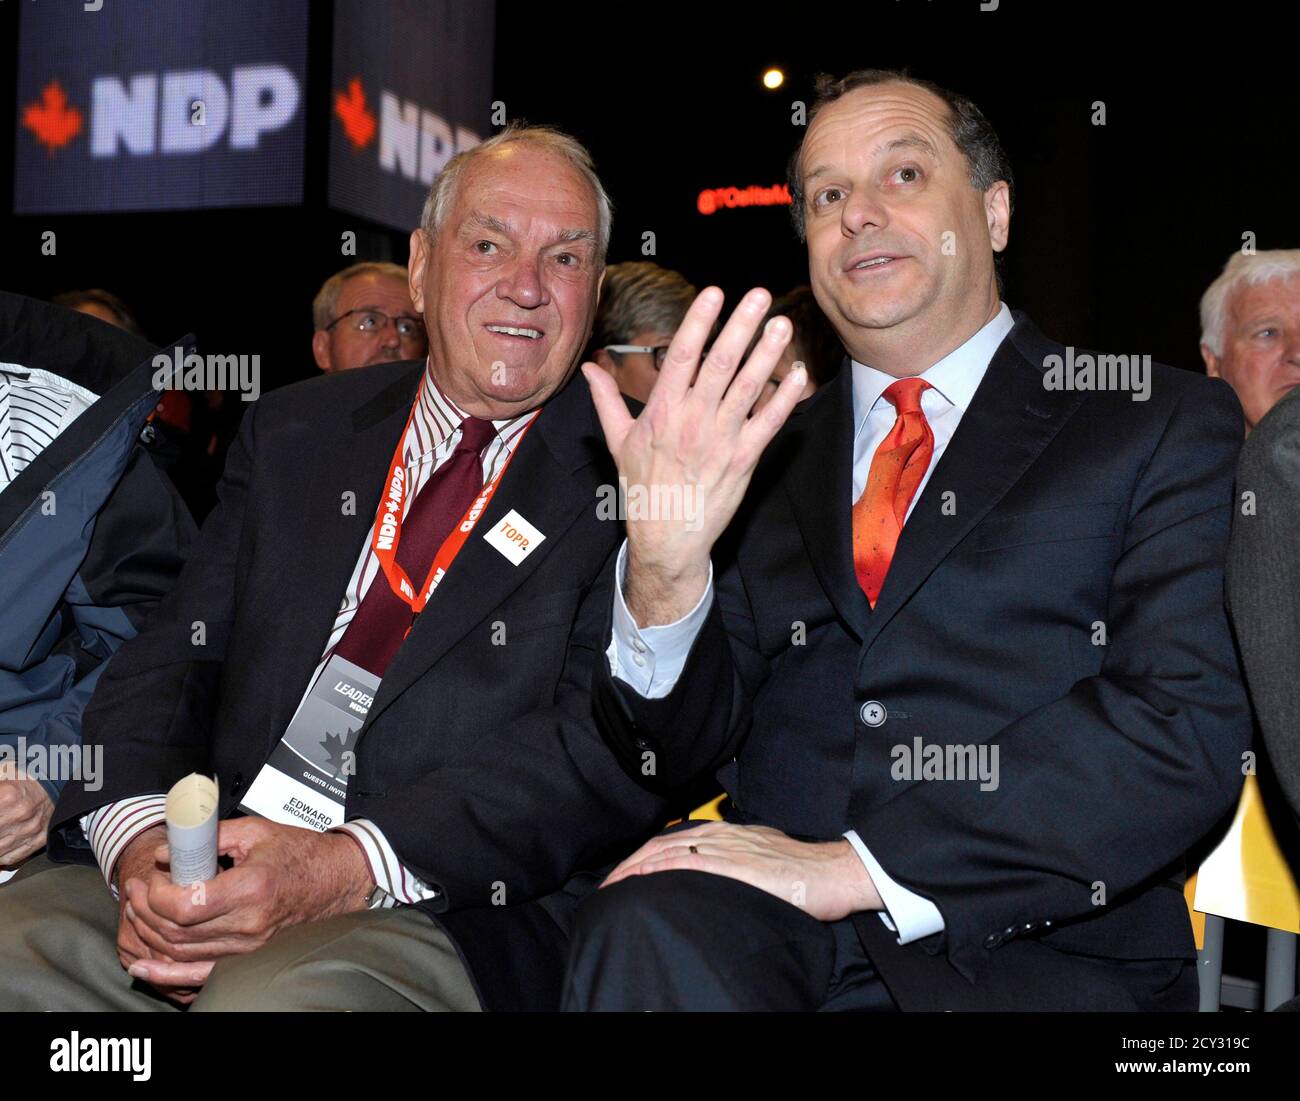 Leadership candidate Brian Topp talks with former NDP Leader Ed Broadbent (L) during the NDP Leadership Convention in Toronto March 23, 2012. The NDP are electing a new leader to replace